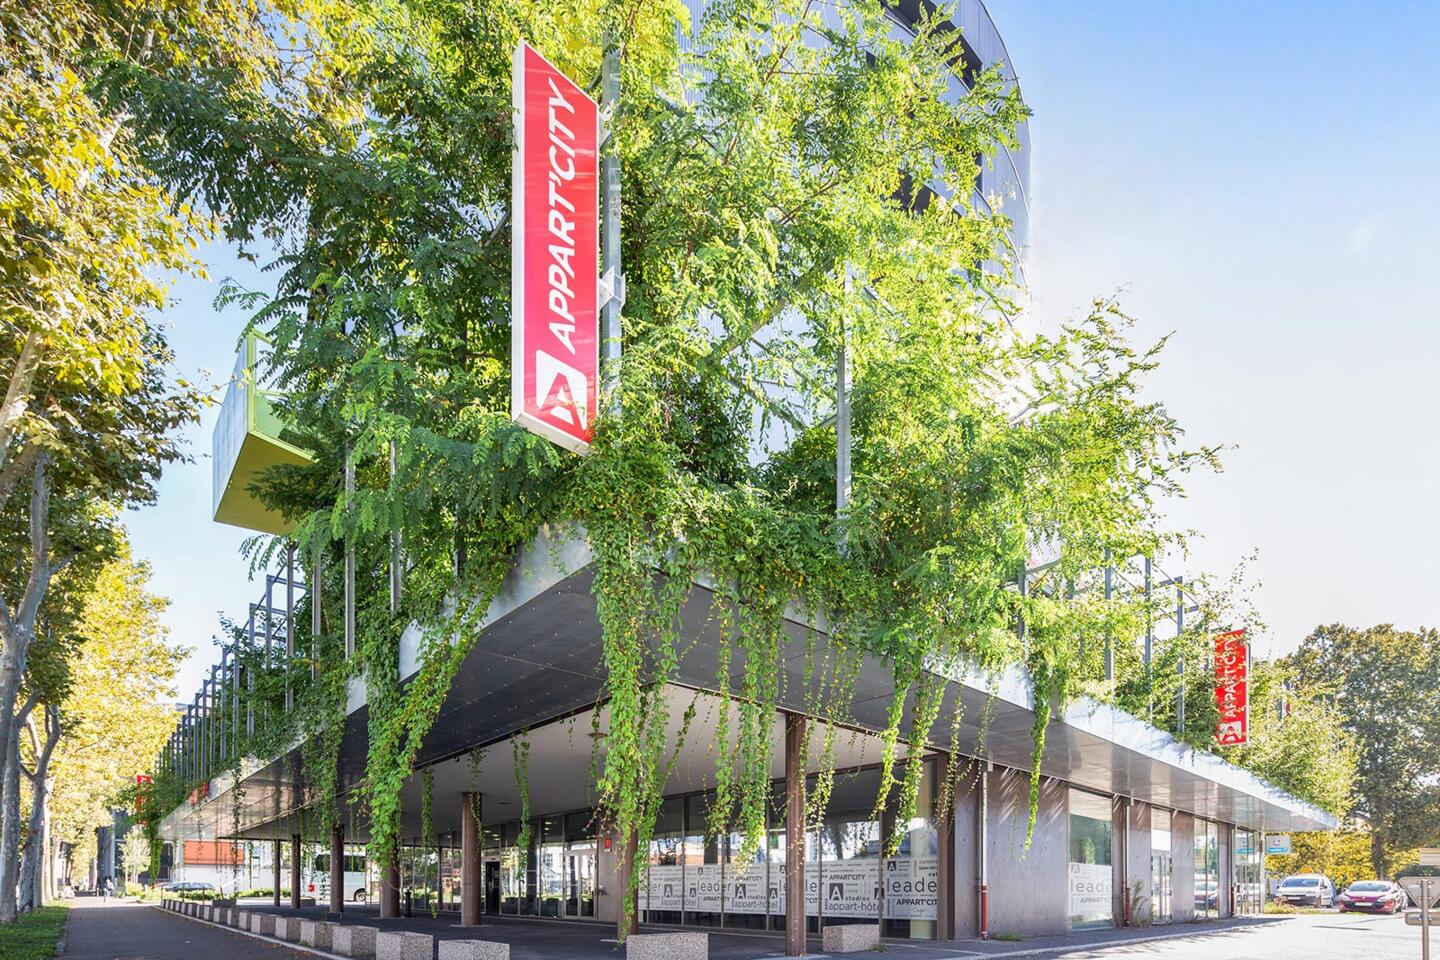 Exterior facade of Appart'City with vertical red signs, located on a tree-lined street, showcasing a modern eco-friendly aparthotel in an urban setting.